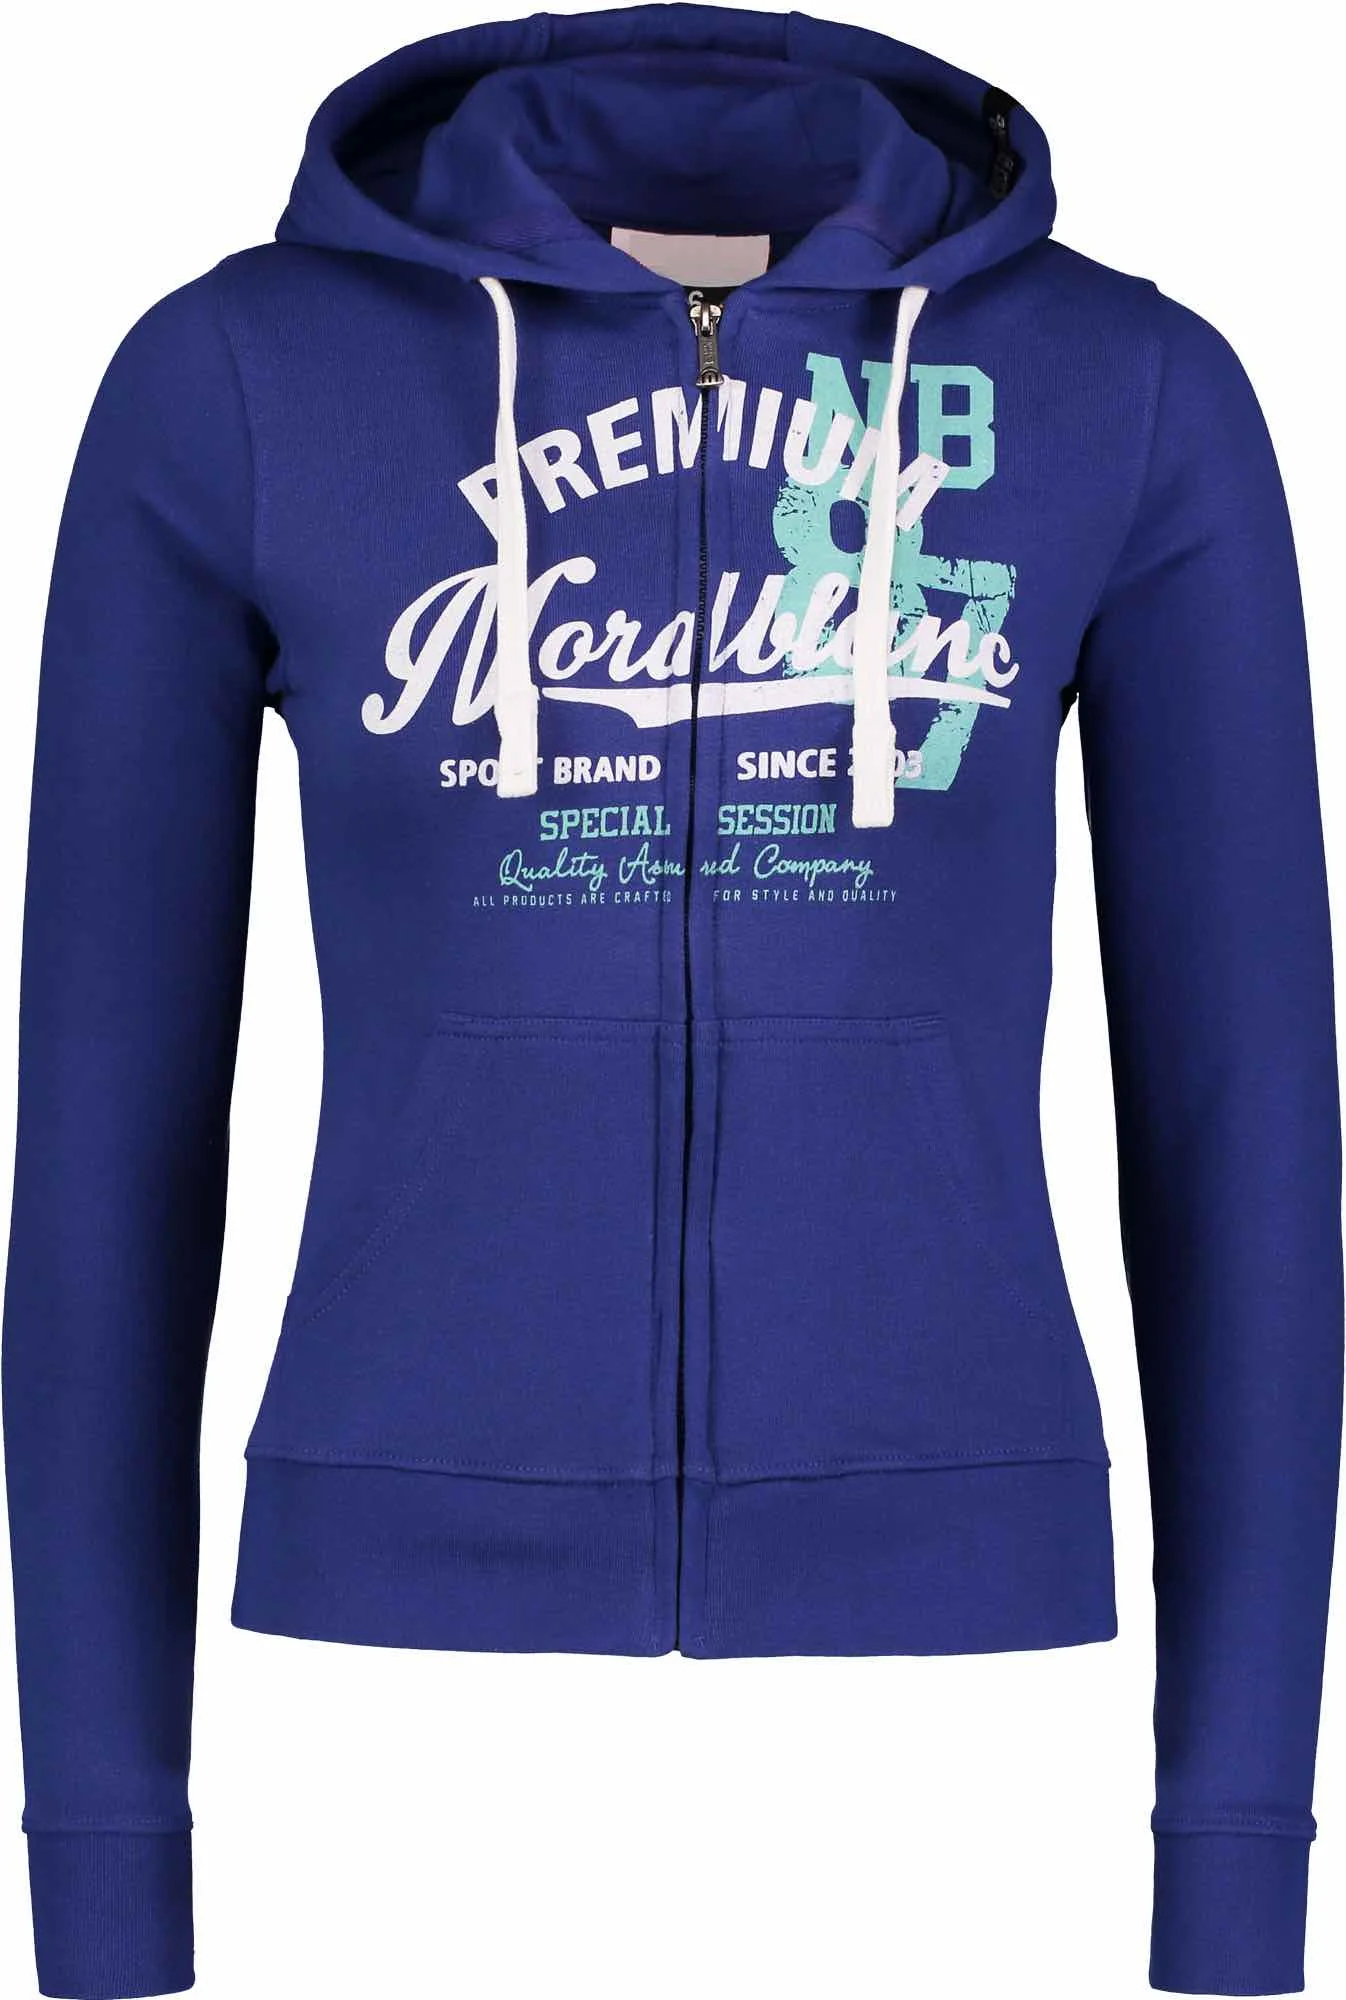 Hoodies for University - Bangladesh Factory, Suppliers, Manufacturers